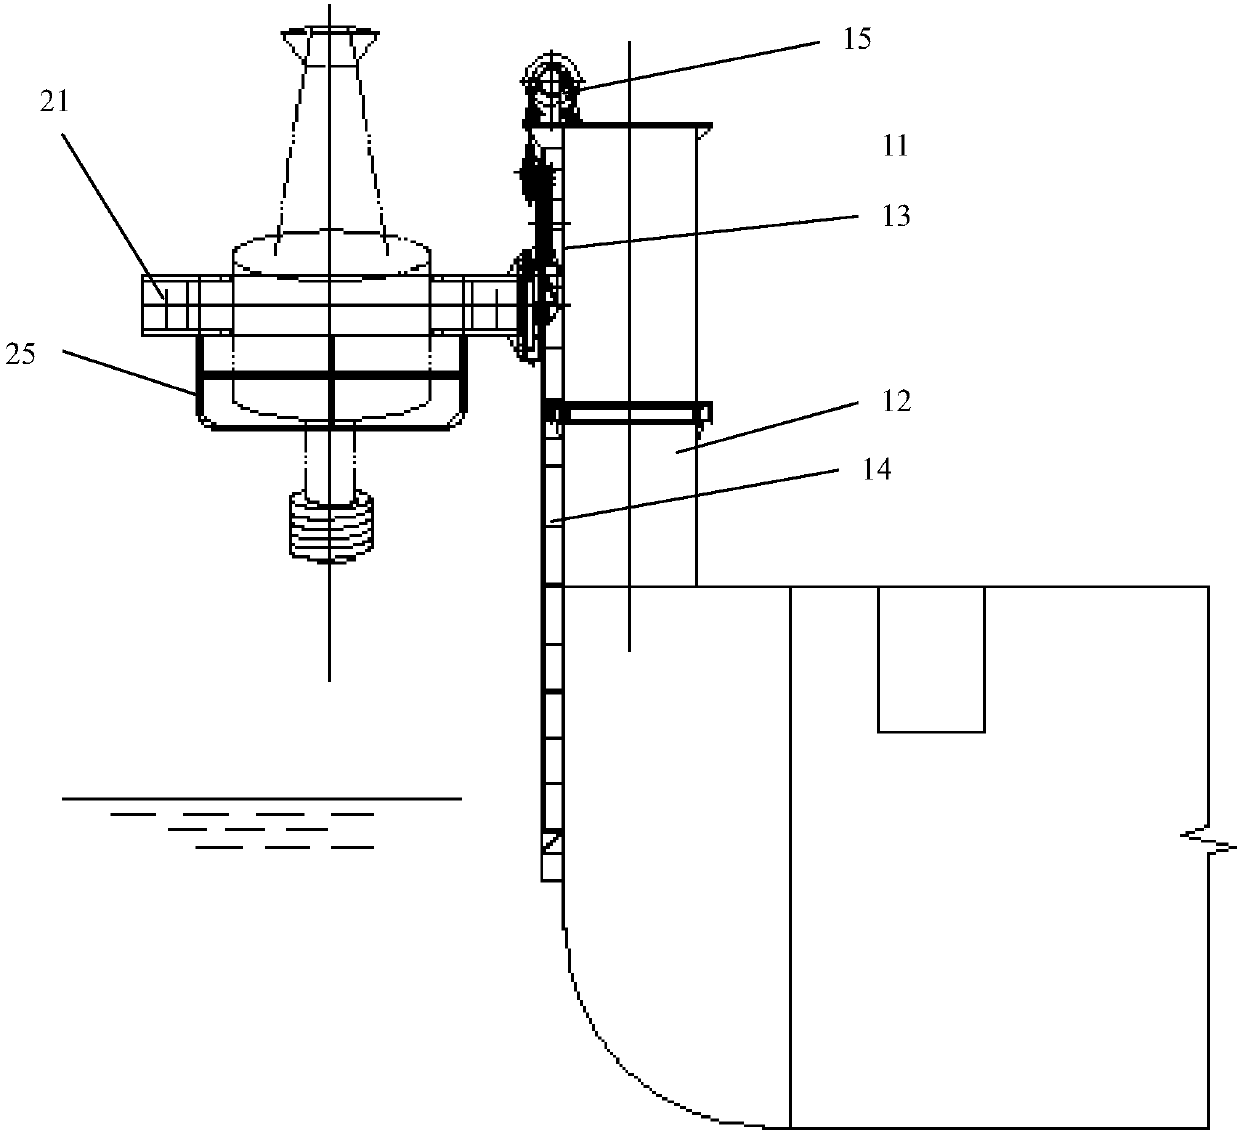 Automated buoy recycling and laying device